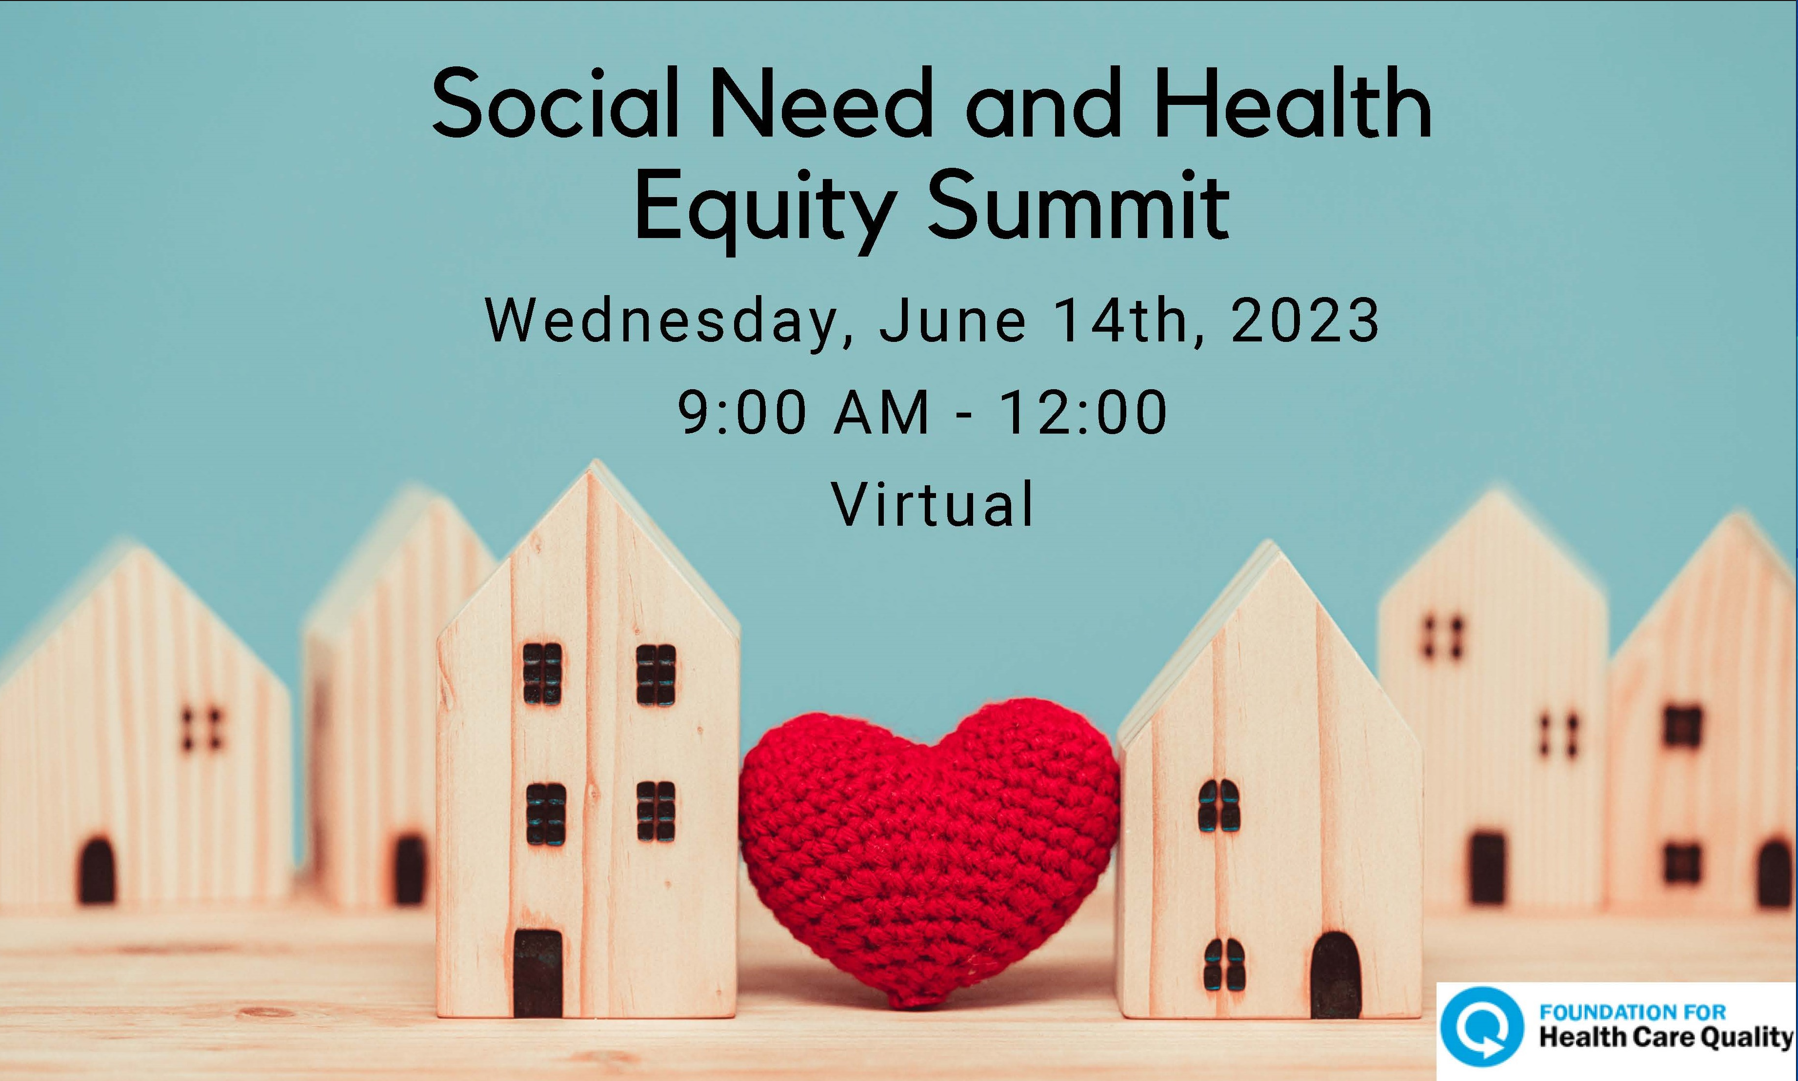 Social Need and Health Equity Summit